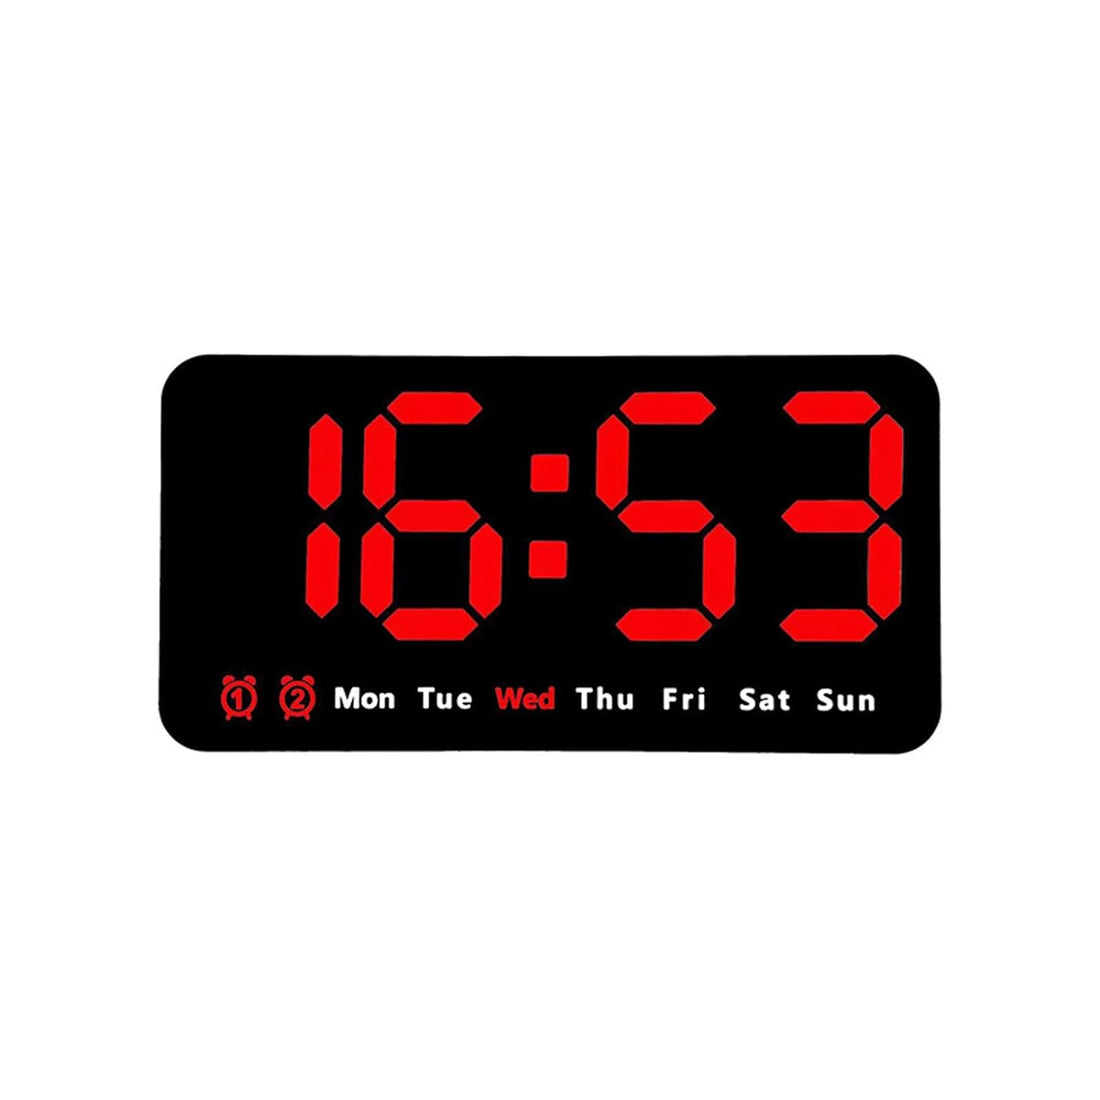 LKJYBG LED Digital Wall Clock with 2 Alarm Large Display Alarm Clock for Living Room Office Classroom Gym Shop Decor red Light One Size